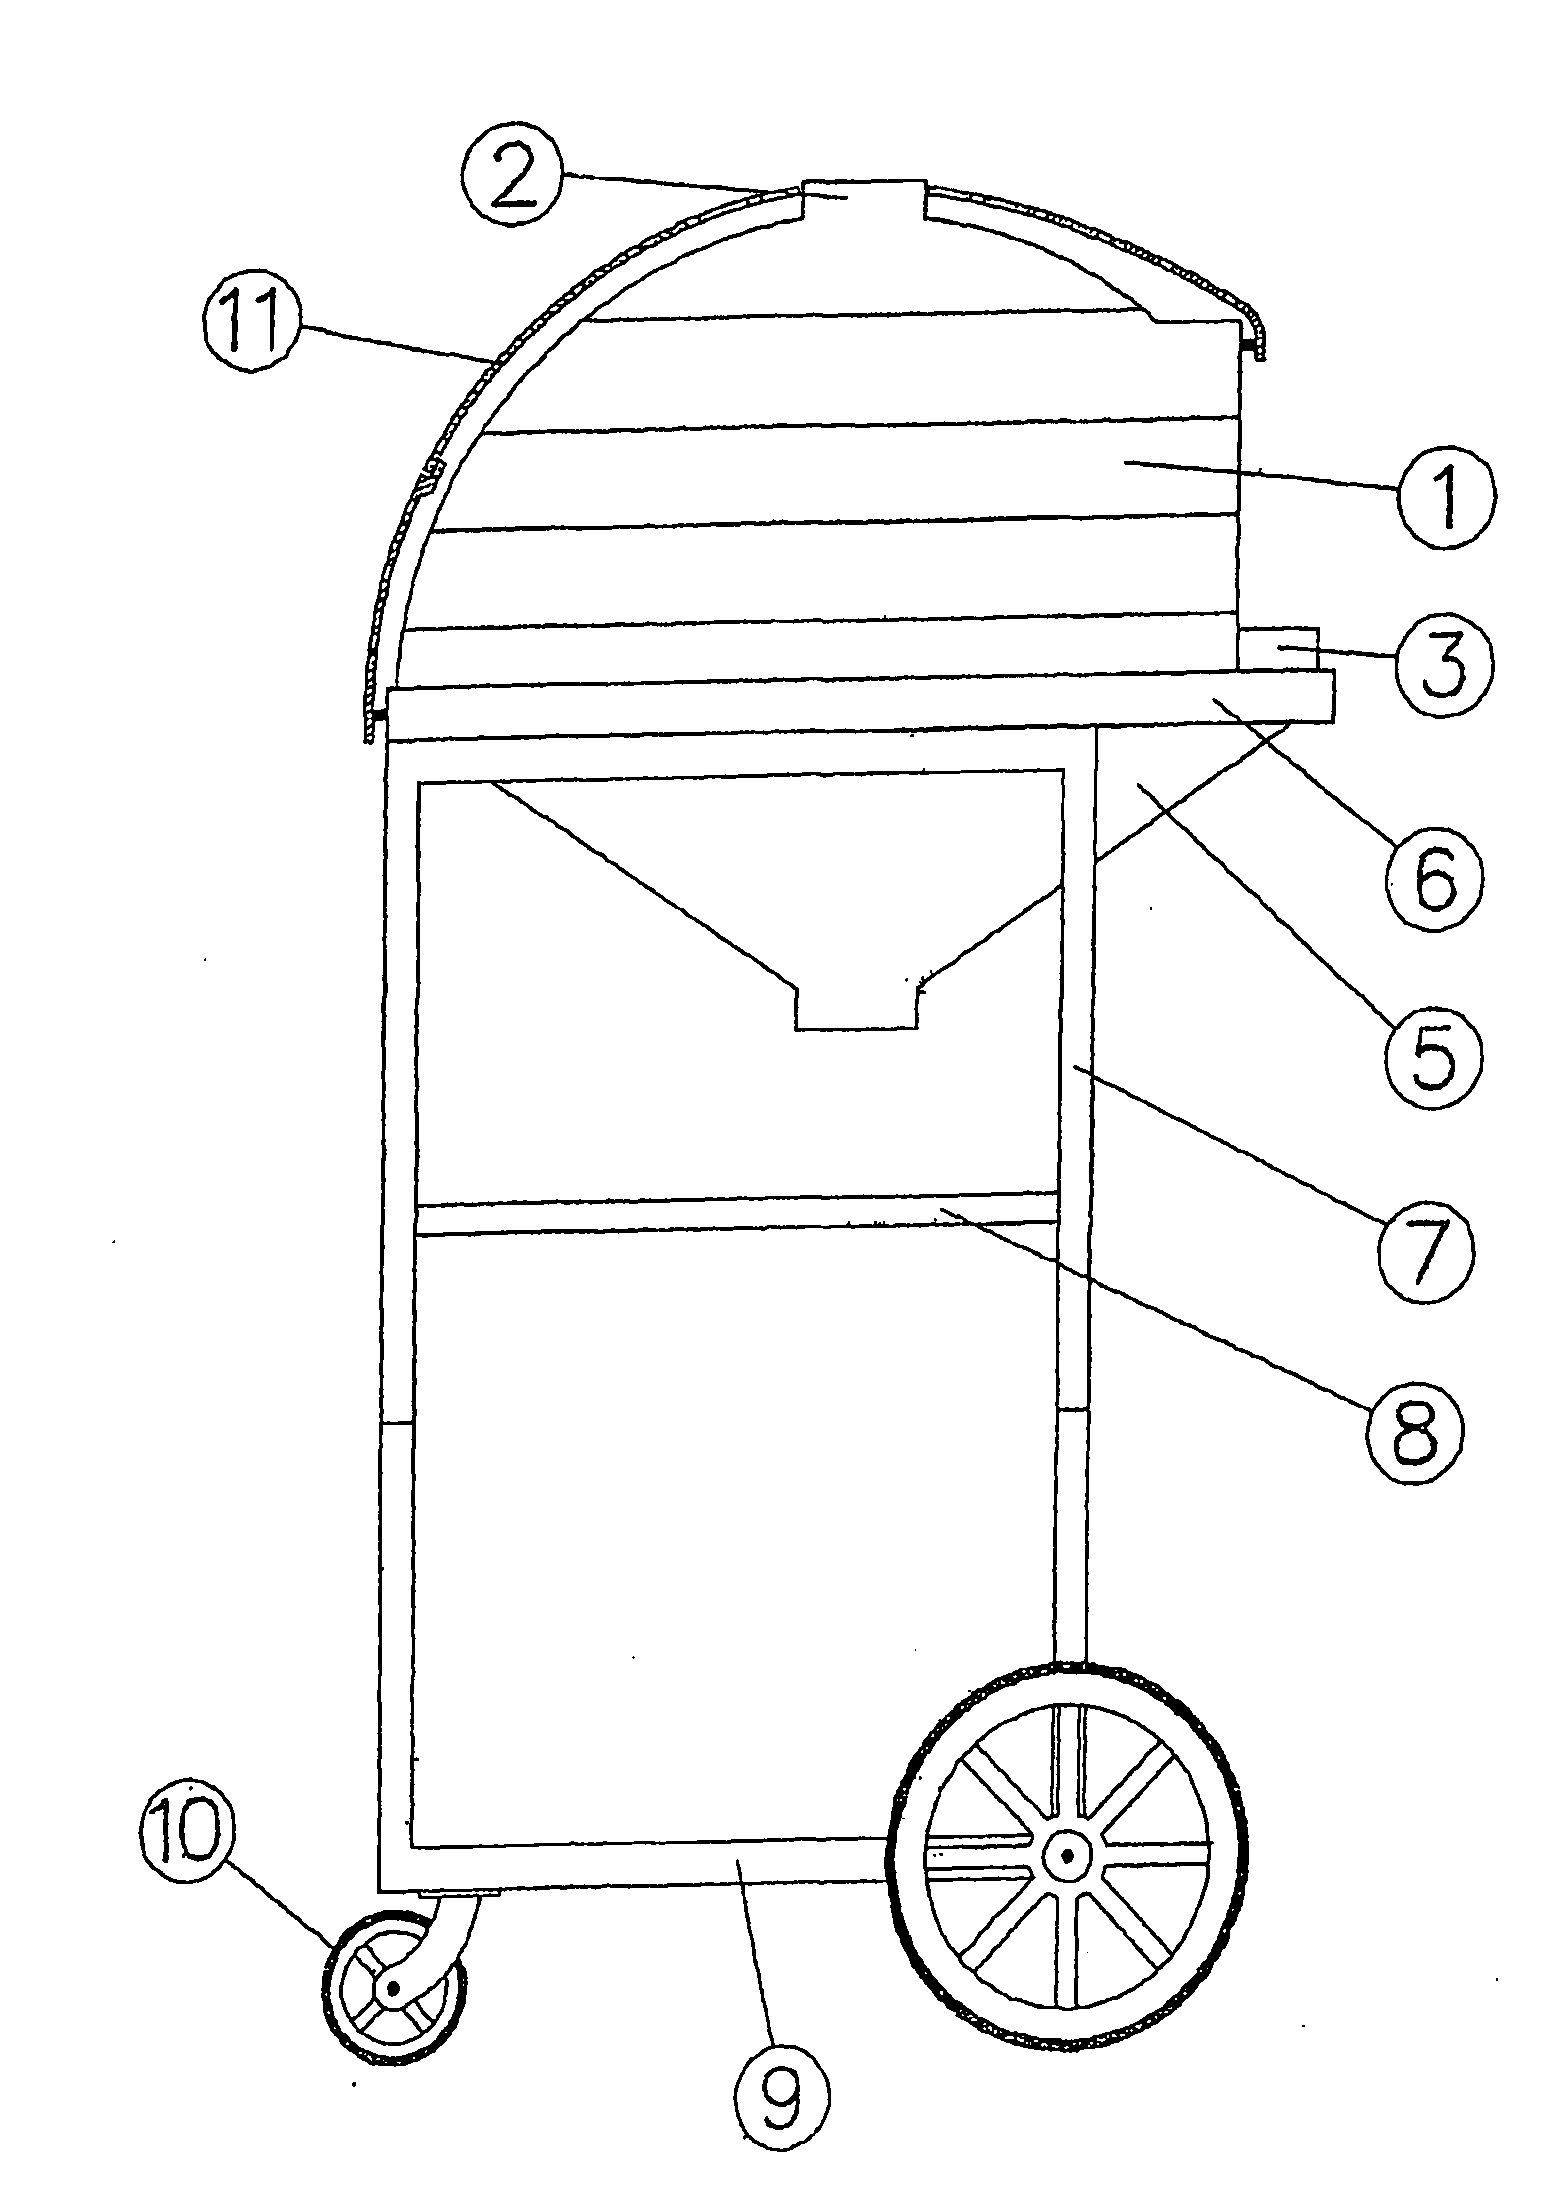 Device for cooking pizzas and barbecues